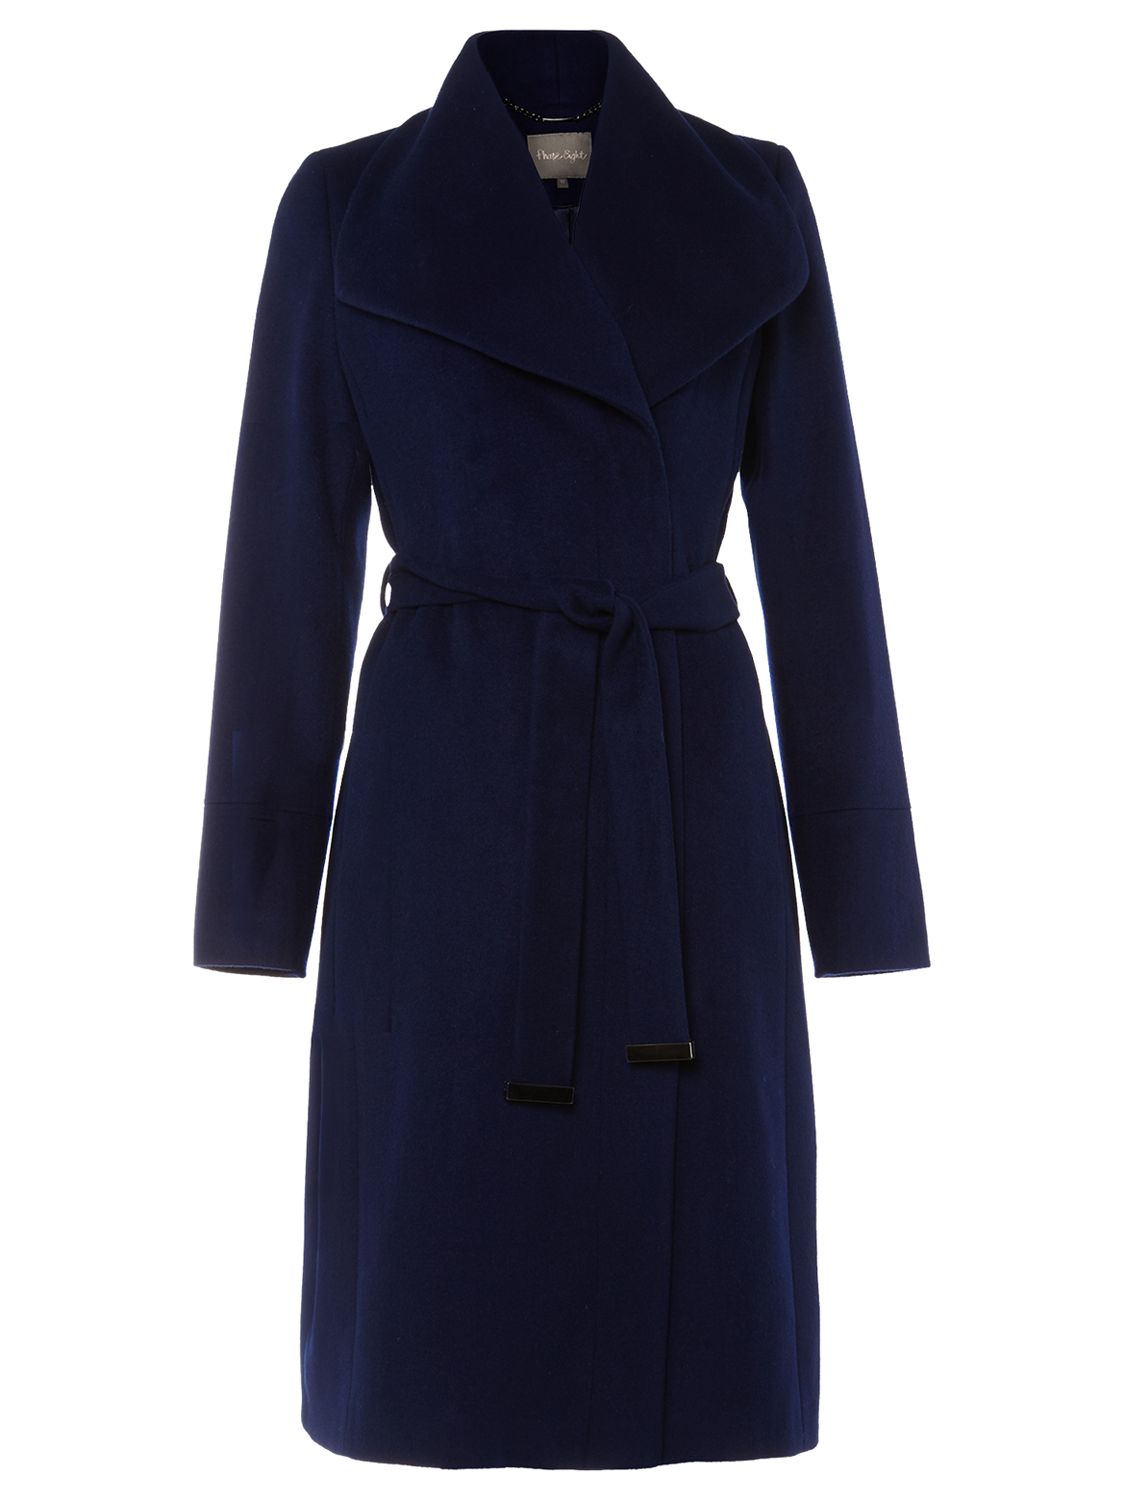 Phase Eight Nicci Belted Coat, Ink Blue